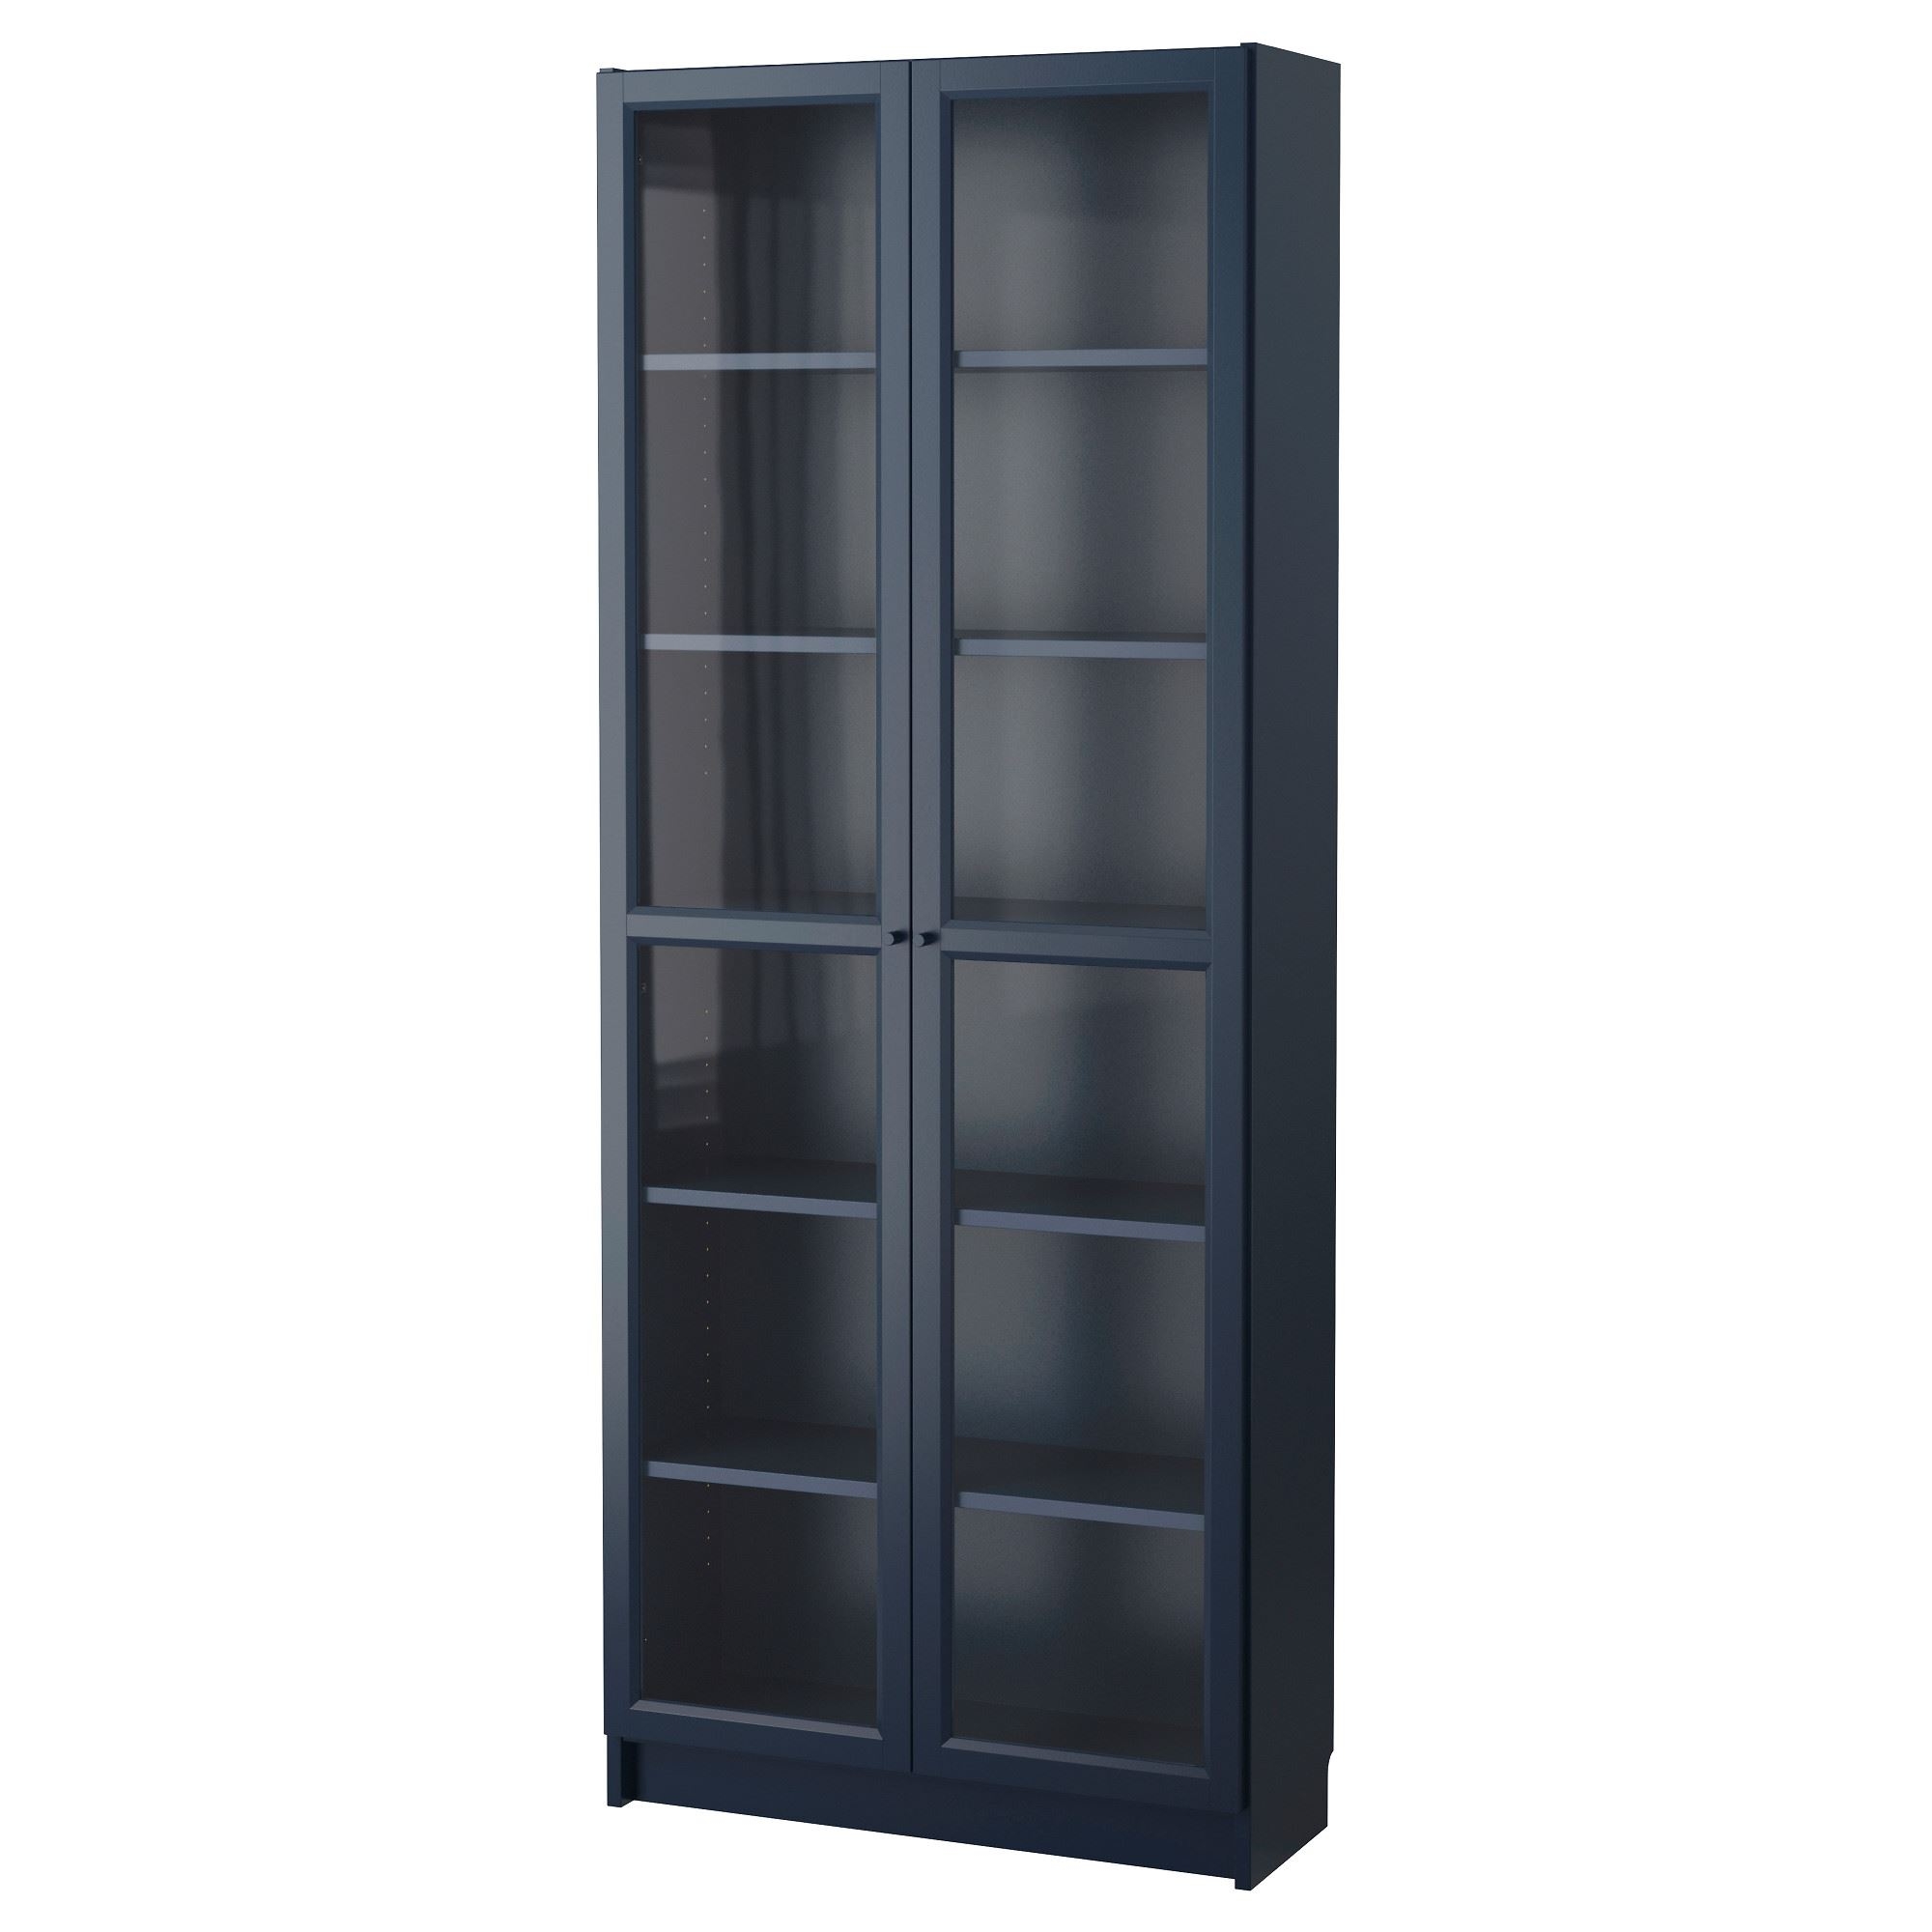 Bookcase With Glass Doors Visualhunt, Maple Bookcase With Glass Doors